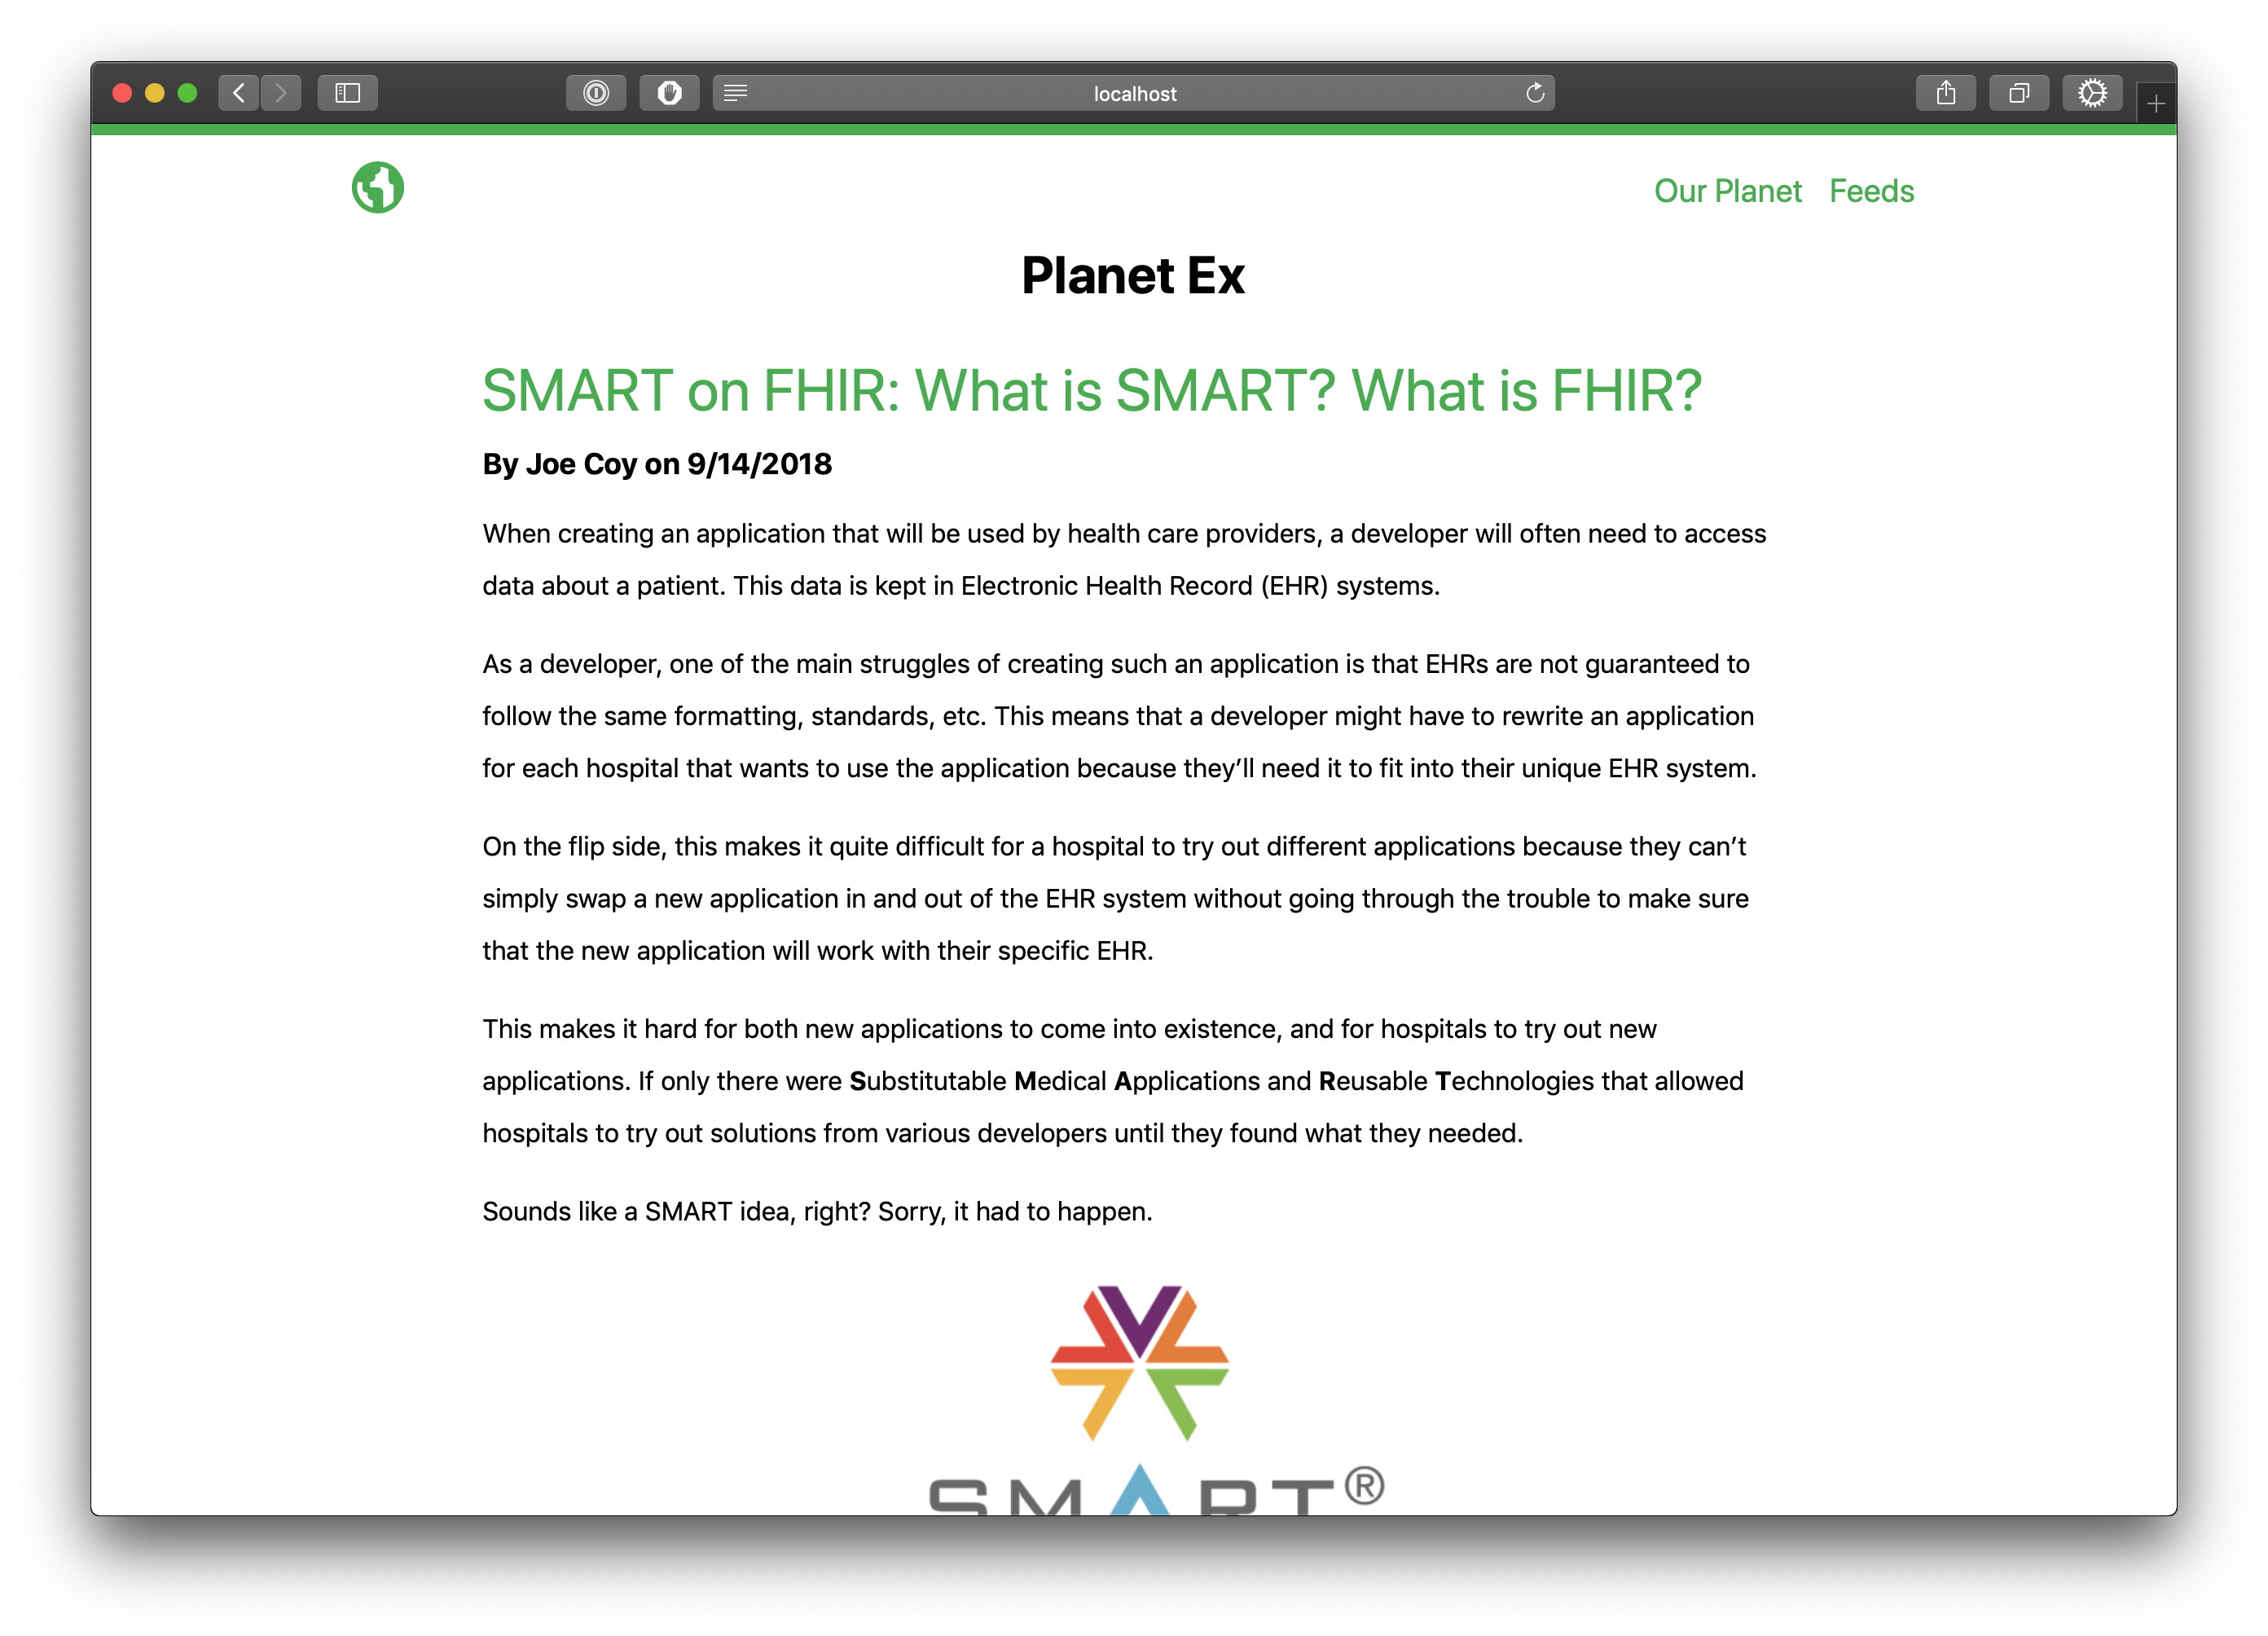 Screenshot of the PlanetEx application presented in the Safari web browser